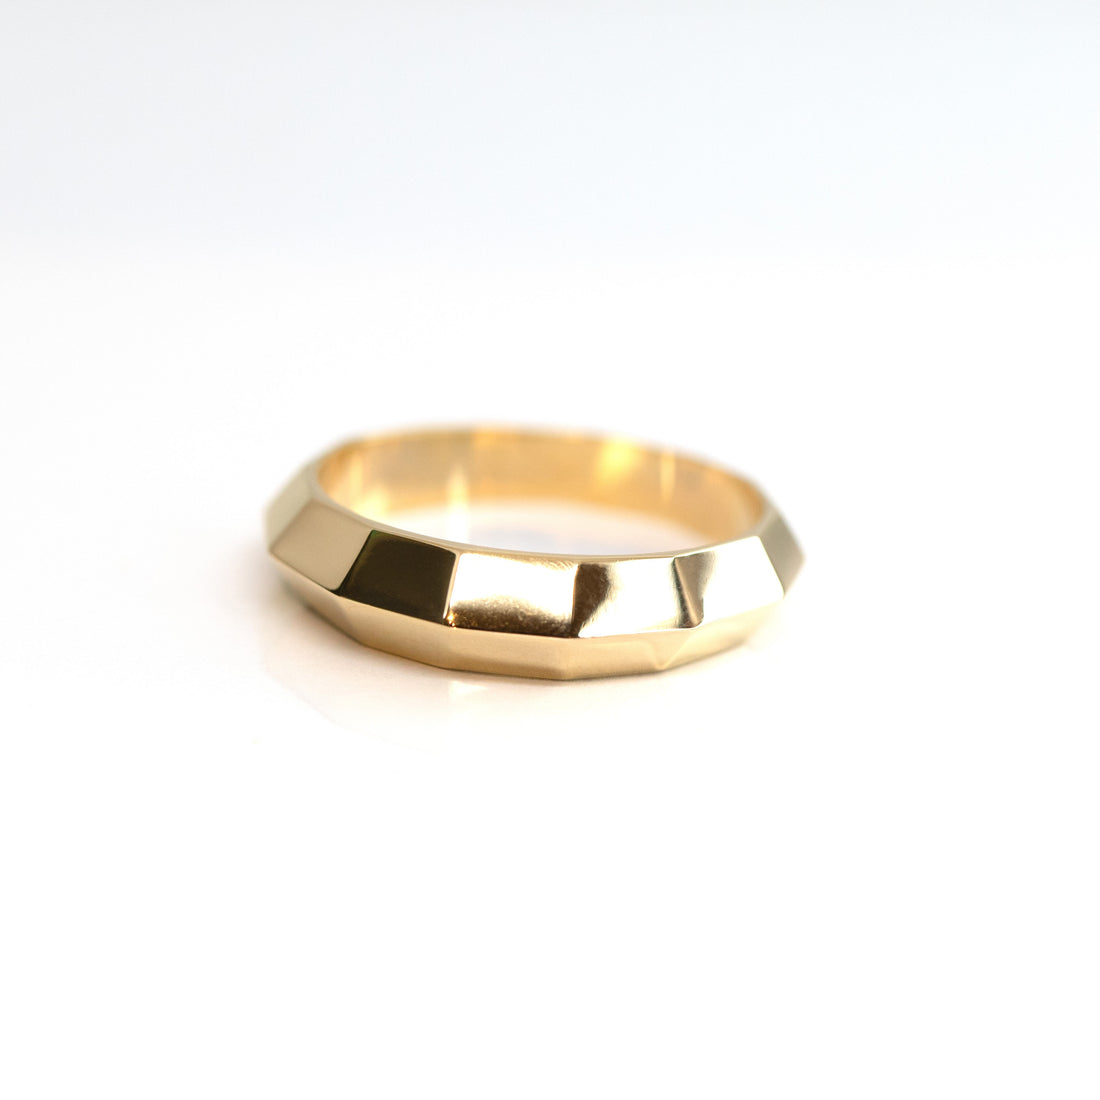 front view of men gold edgy custom made ring in montreal chiseled collection by bena jewely designer in collaboration with boutique ruby mardi best jeweler in canada on white background